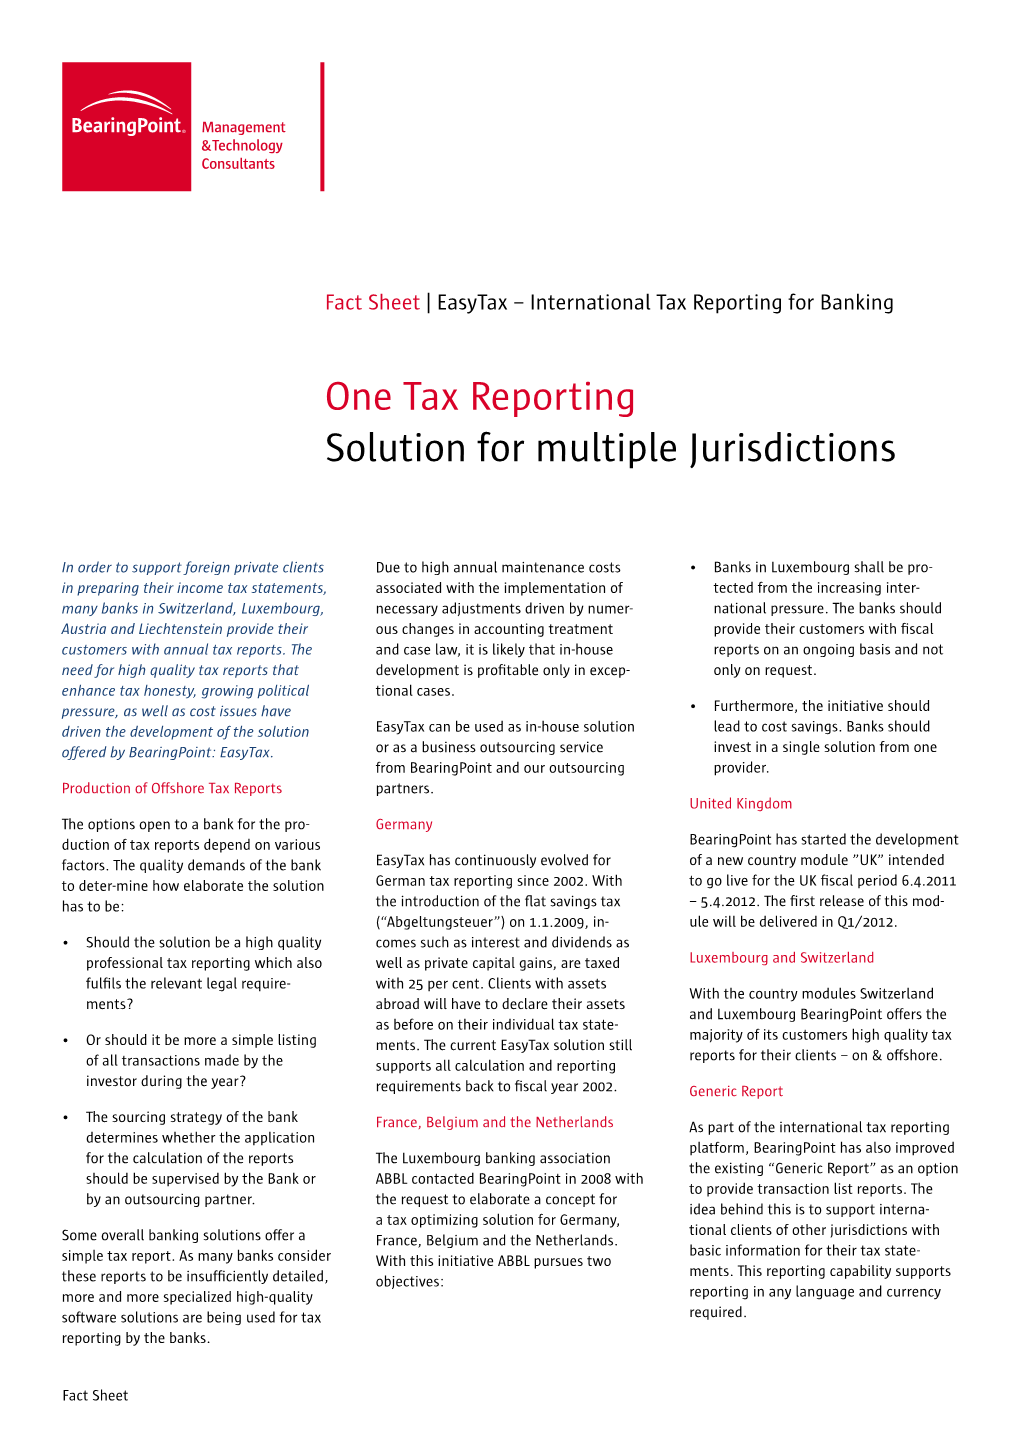 One Tax Reporting Solution for Multiple Jurisdictions